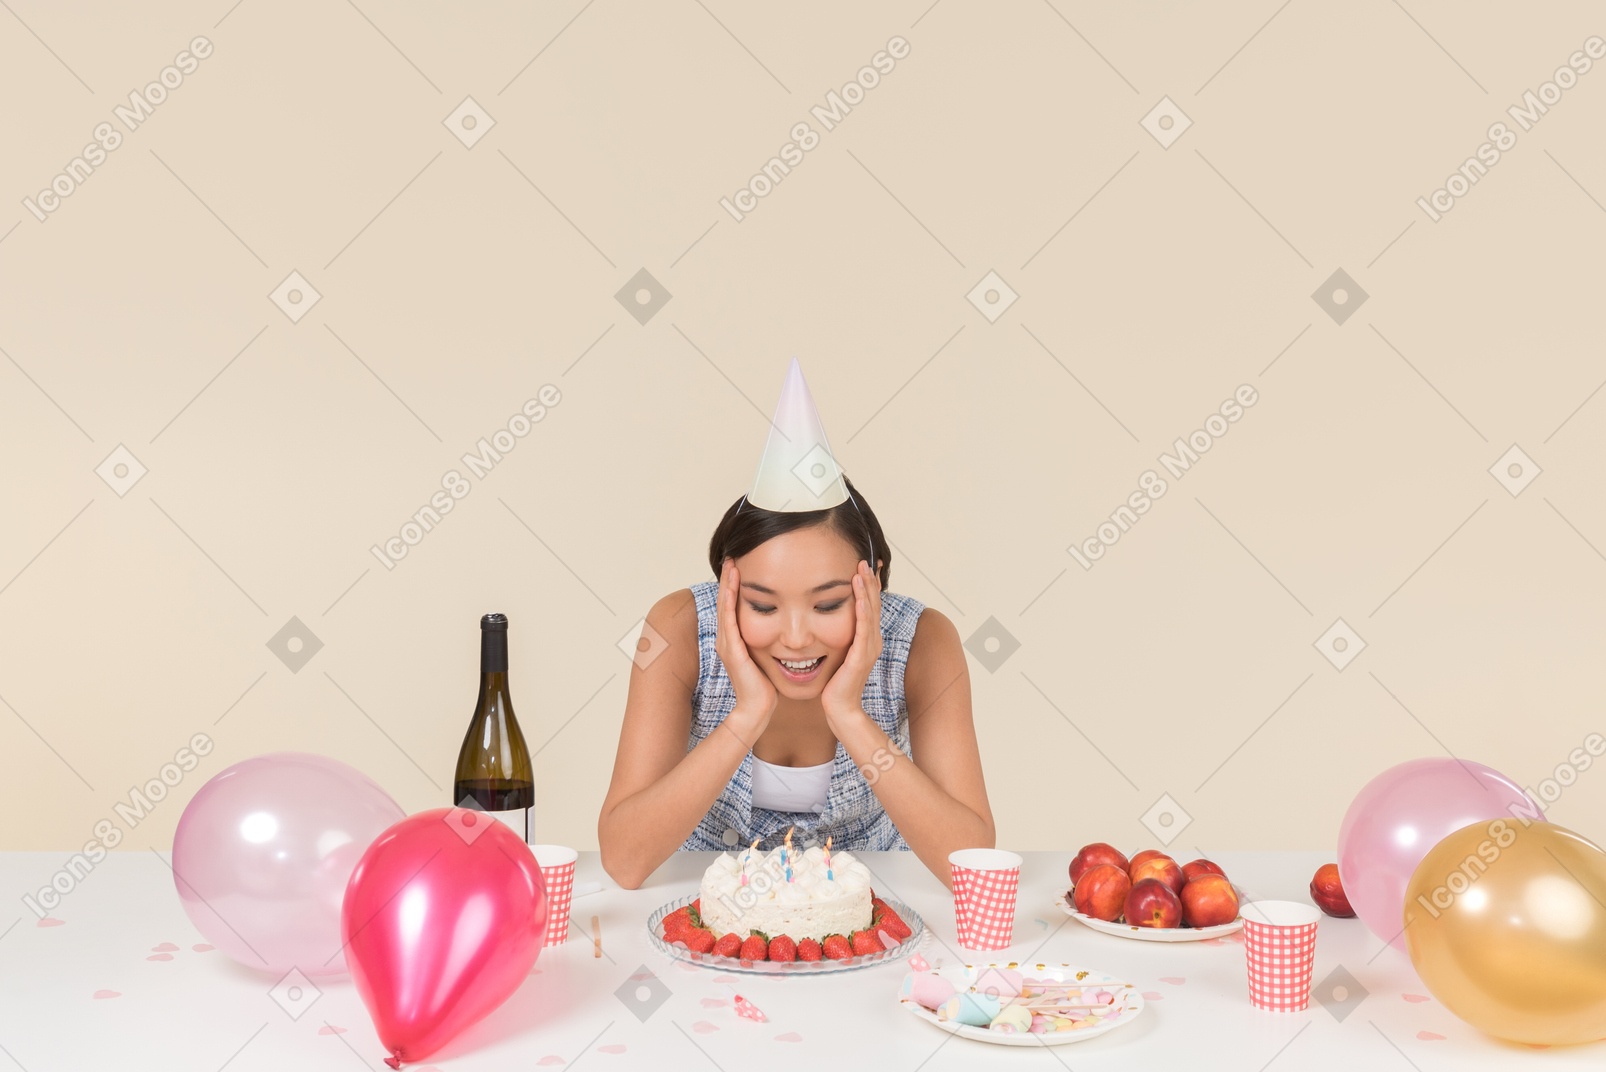 Young asian woman sitting in front of birthday cake and making a wish